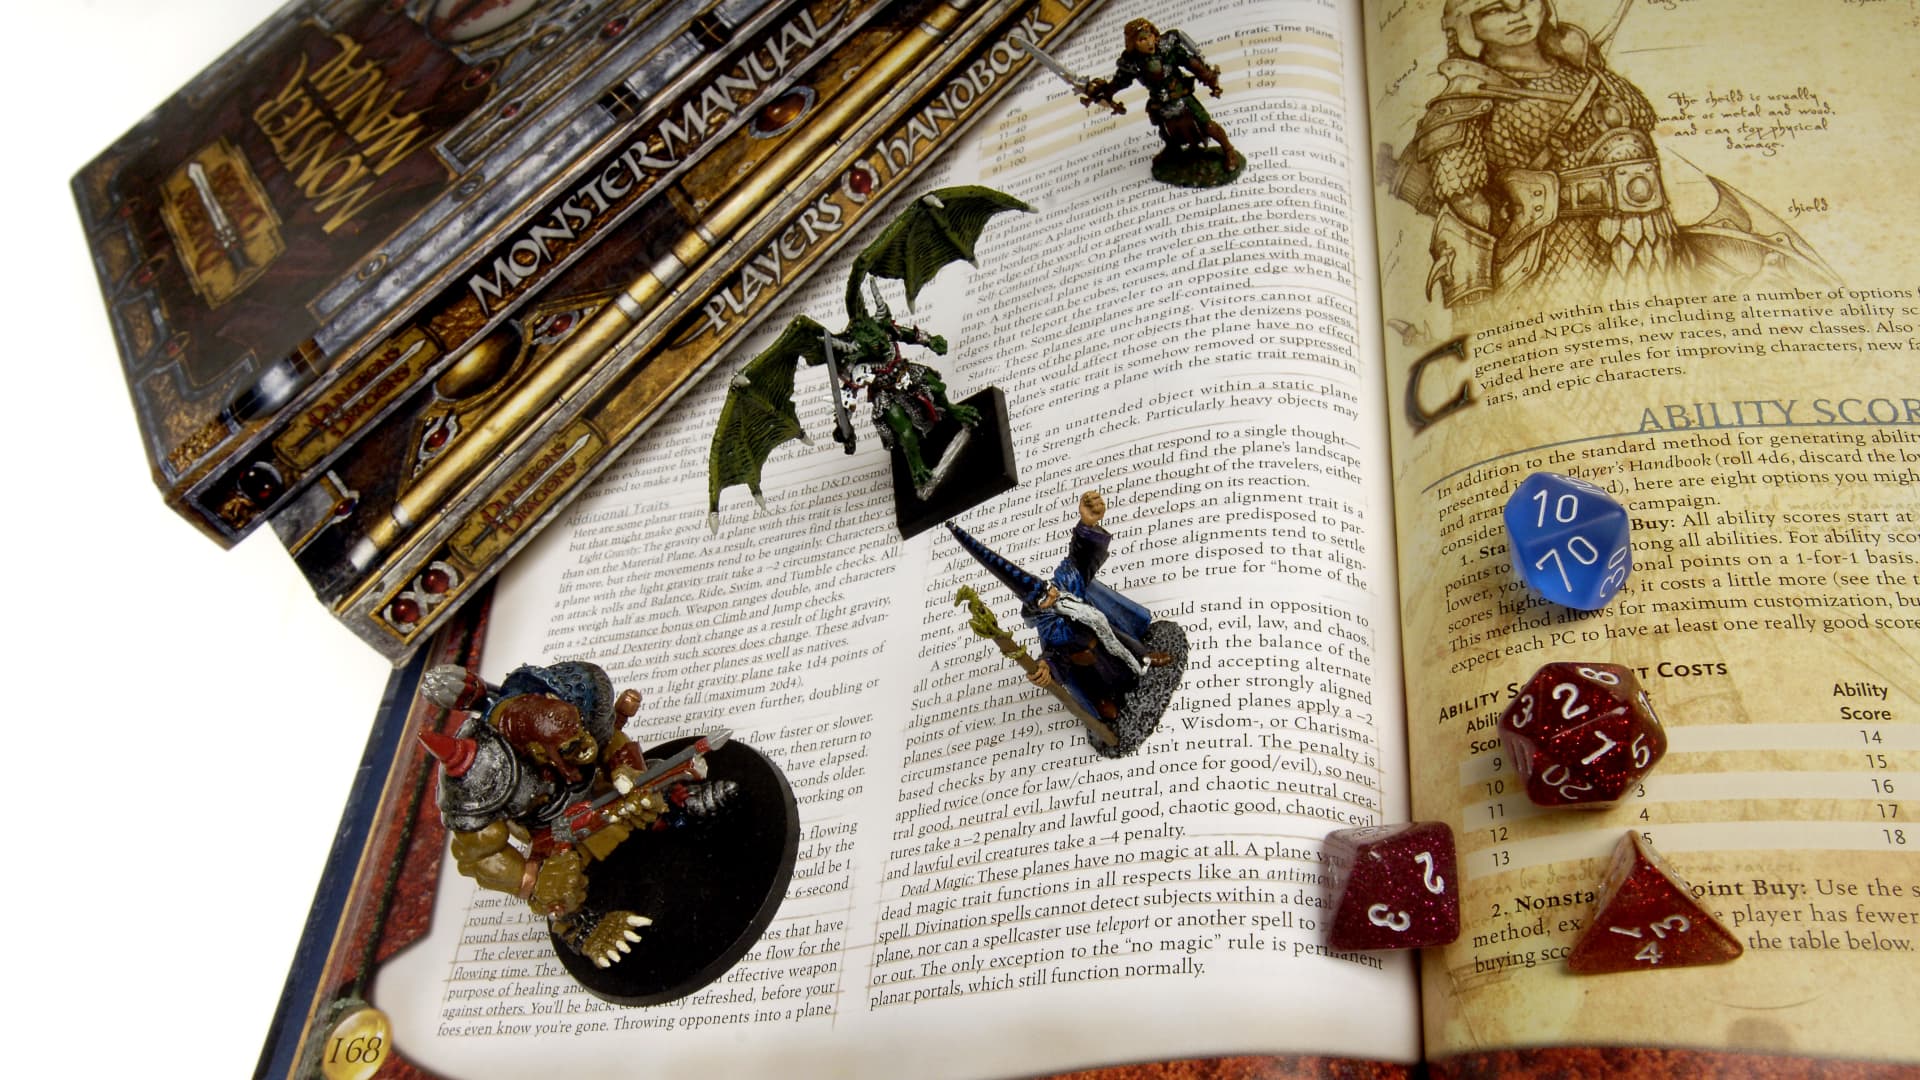 Dungeons & Dragons books, dice and mini-figurines.